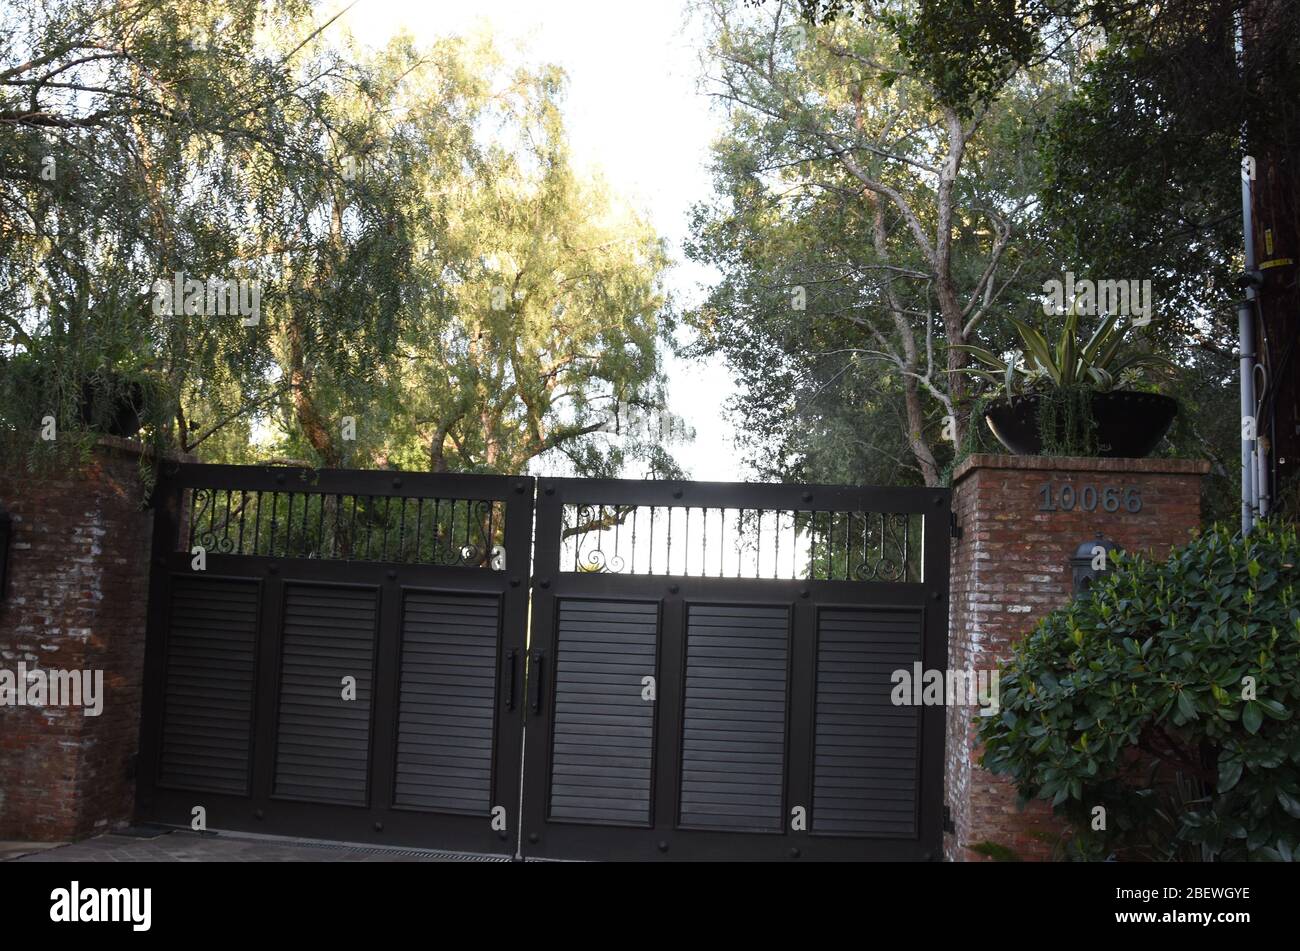 Beverly Hills, California, USA 15th April 2020 A general view of atmosphere of 10066 Cielo Drive where Shaton Tate Lived and Mansion Murders took place (formerly 10050 Cielo Drive) in Beverly Hills, California, USA. Photo by Barry King/Alamy Stock Photo Stock Photo